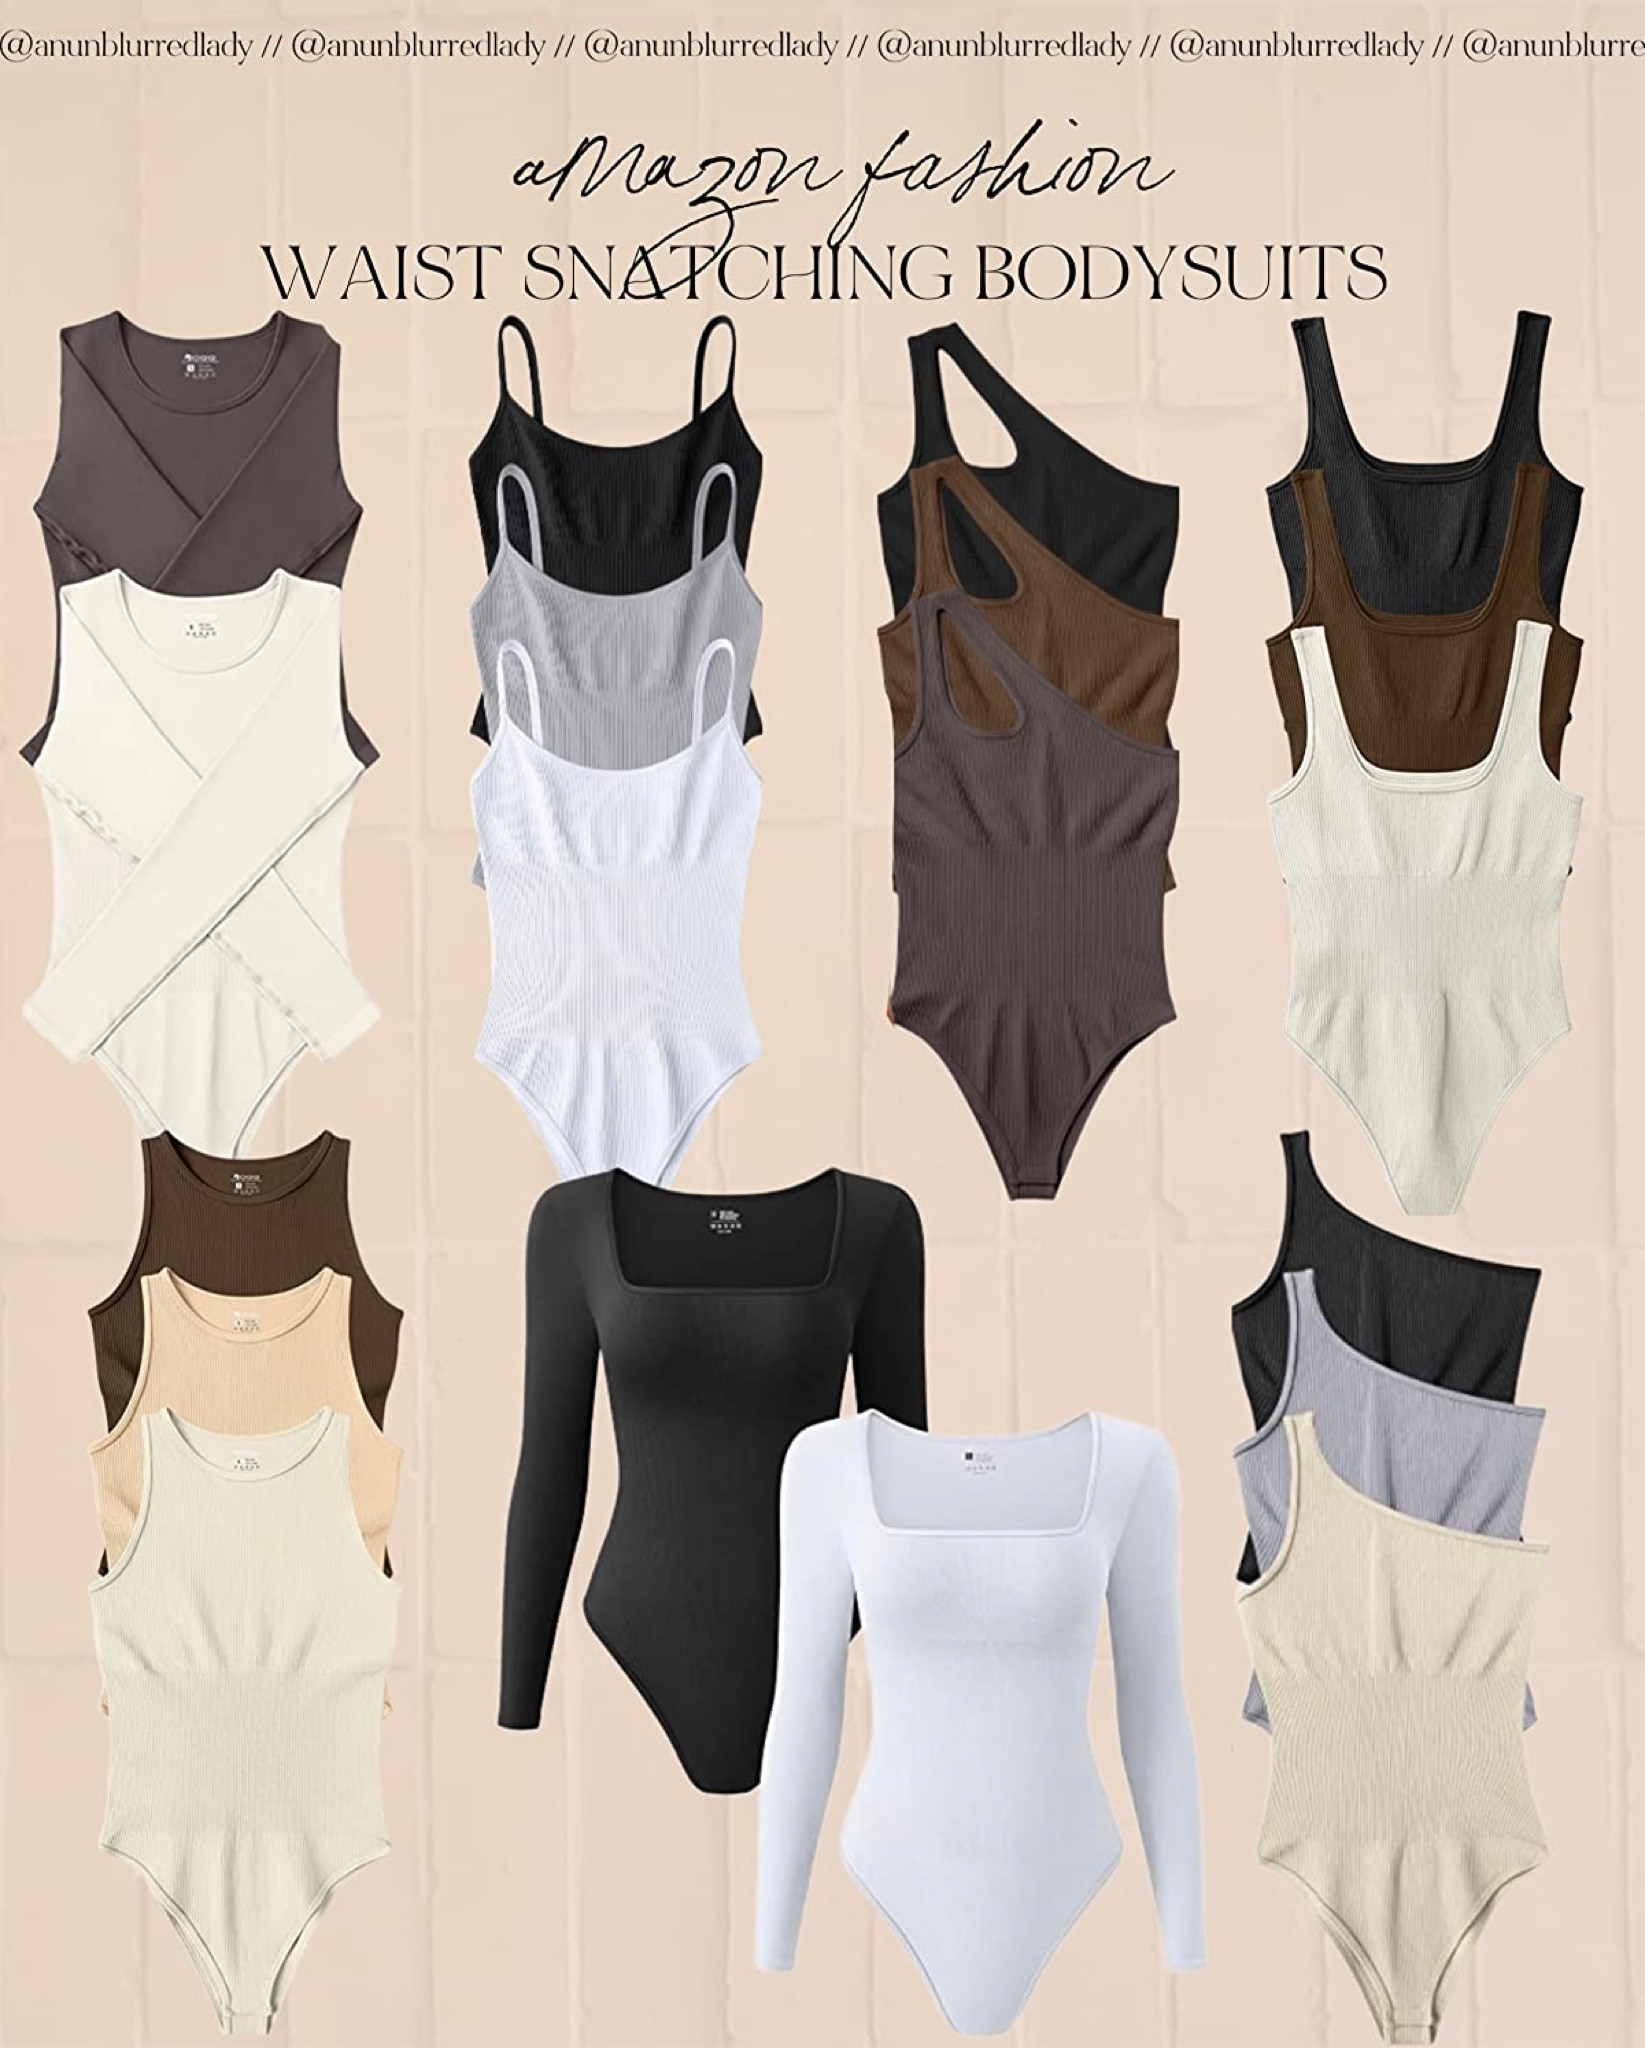 What are the different types of bodysuits?